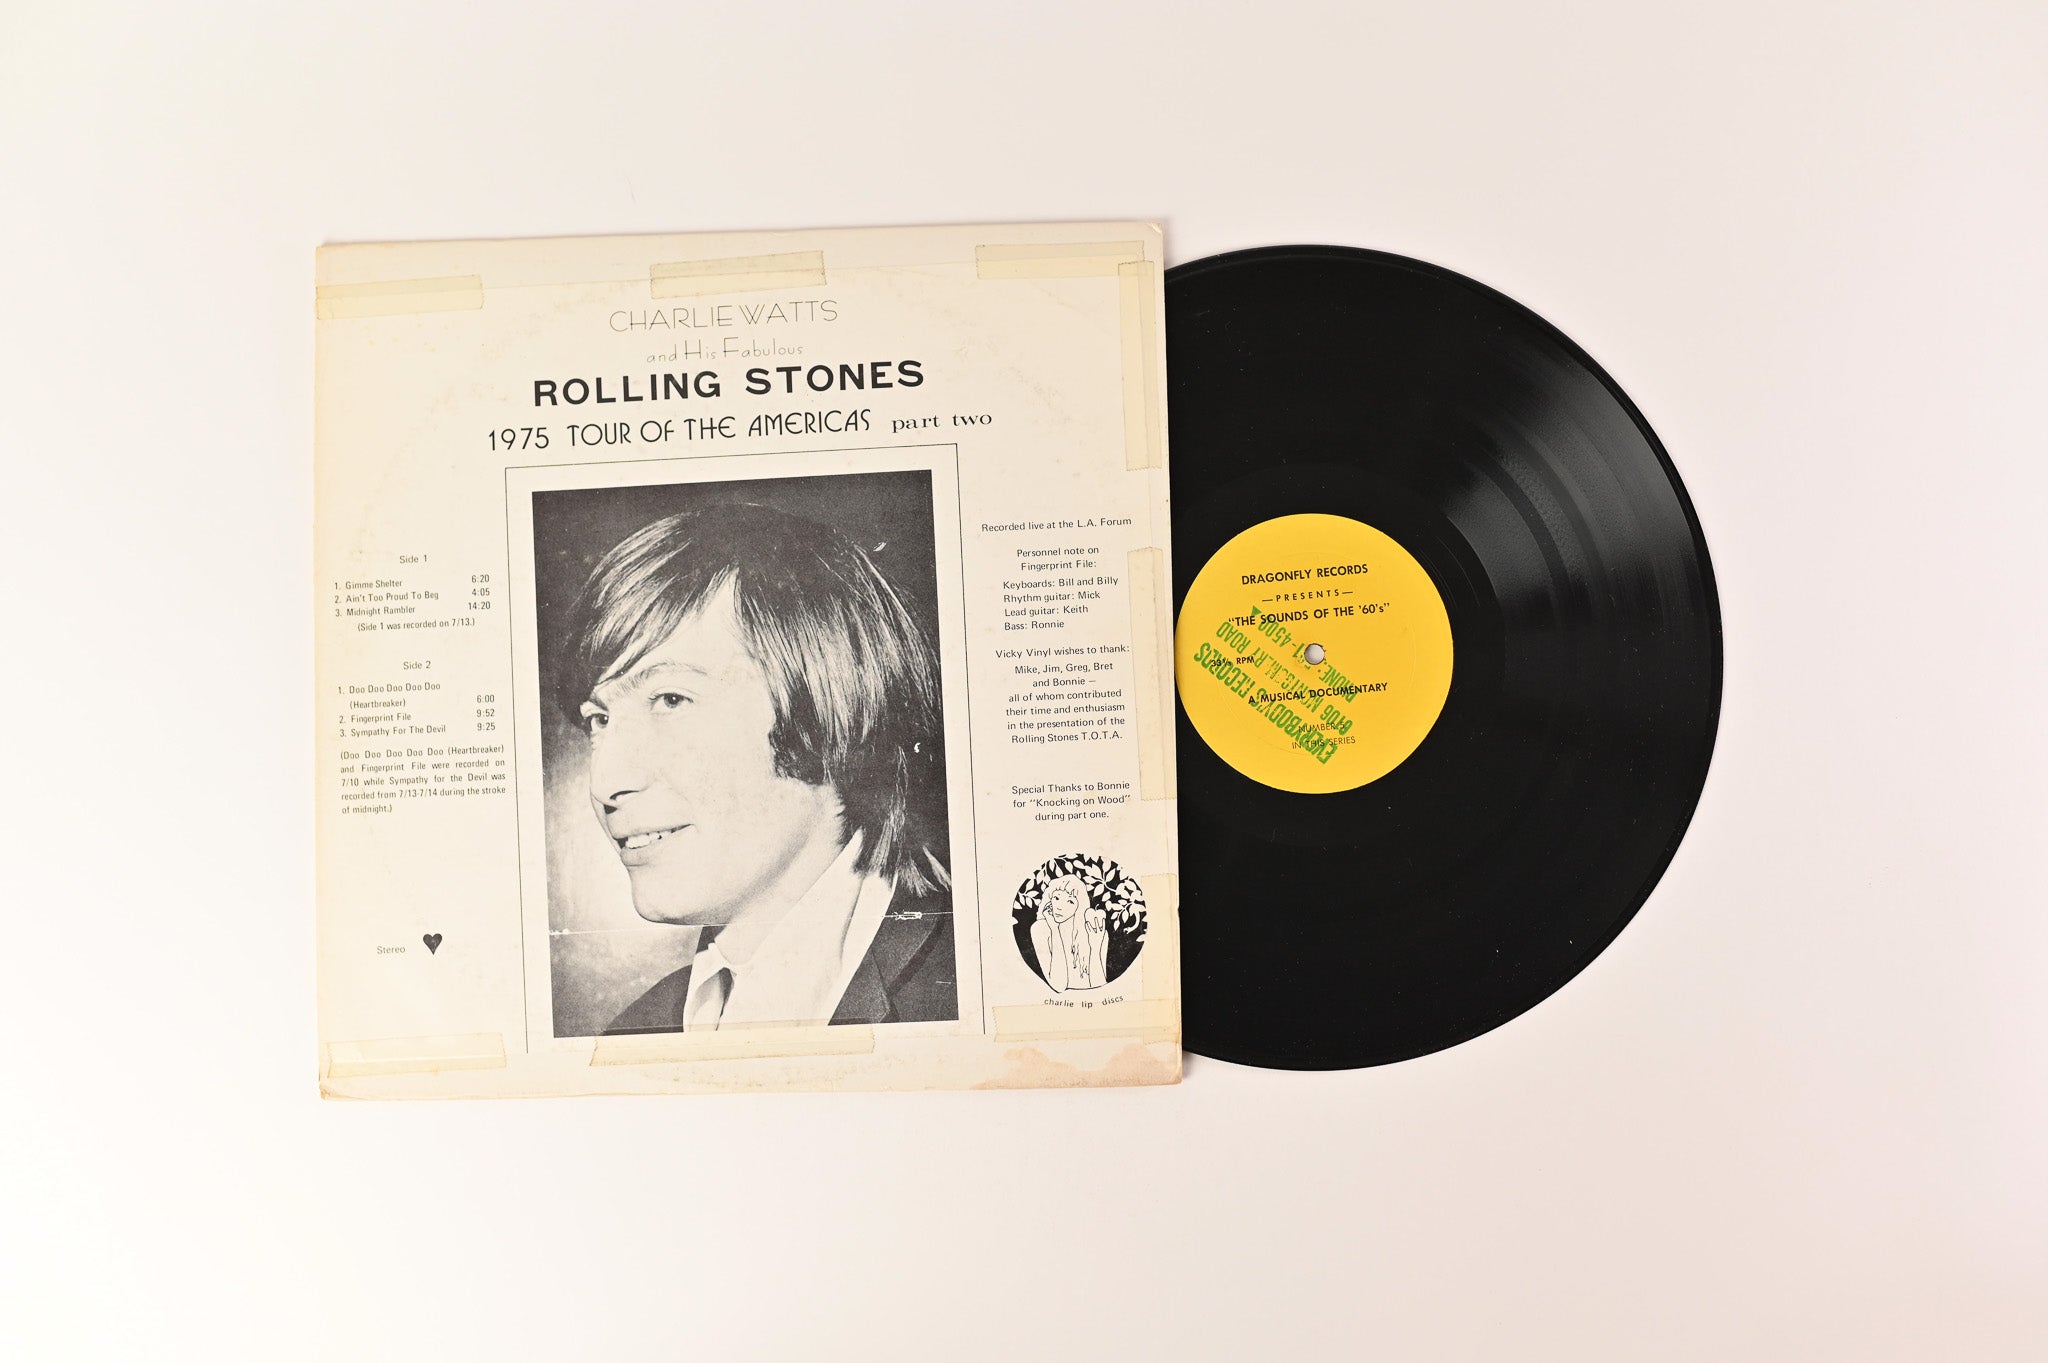 The Rolling Stones - Charlie Watts And His Fabulous Rolling Stones 1975 Tour Of The Americas Part Two on Dragonfly Unofficial